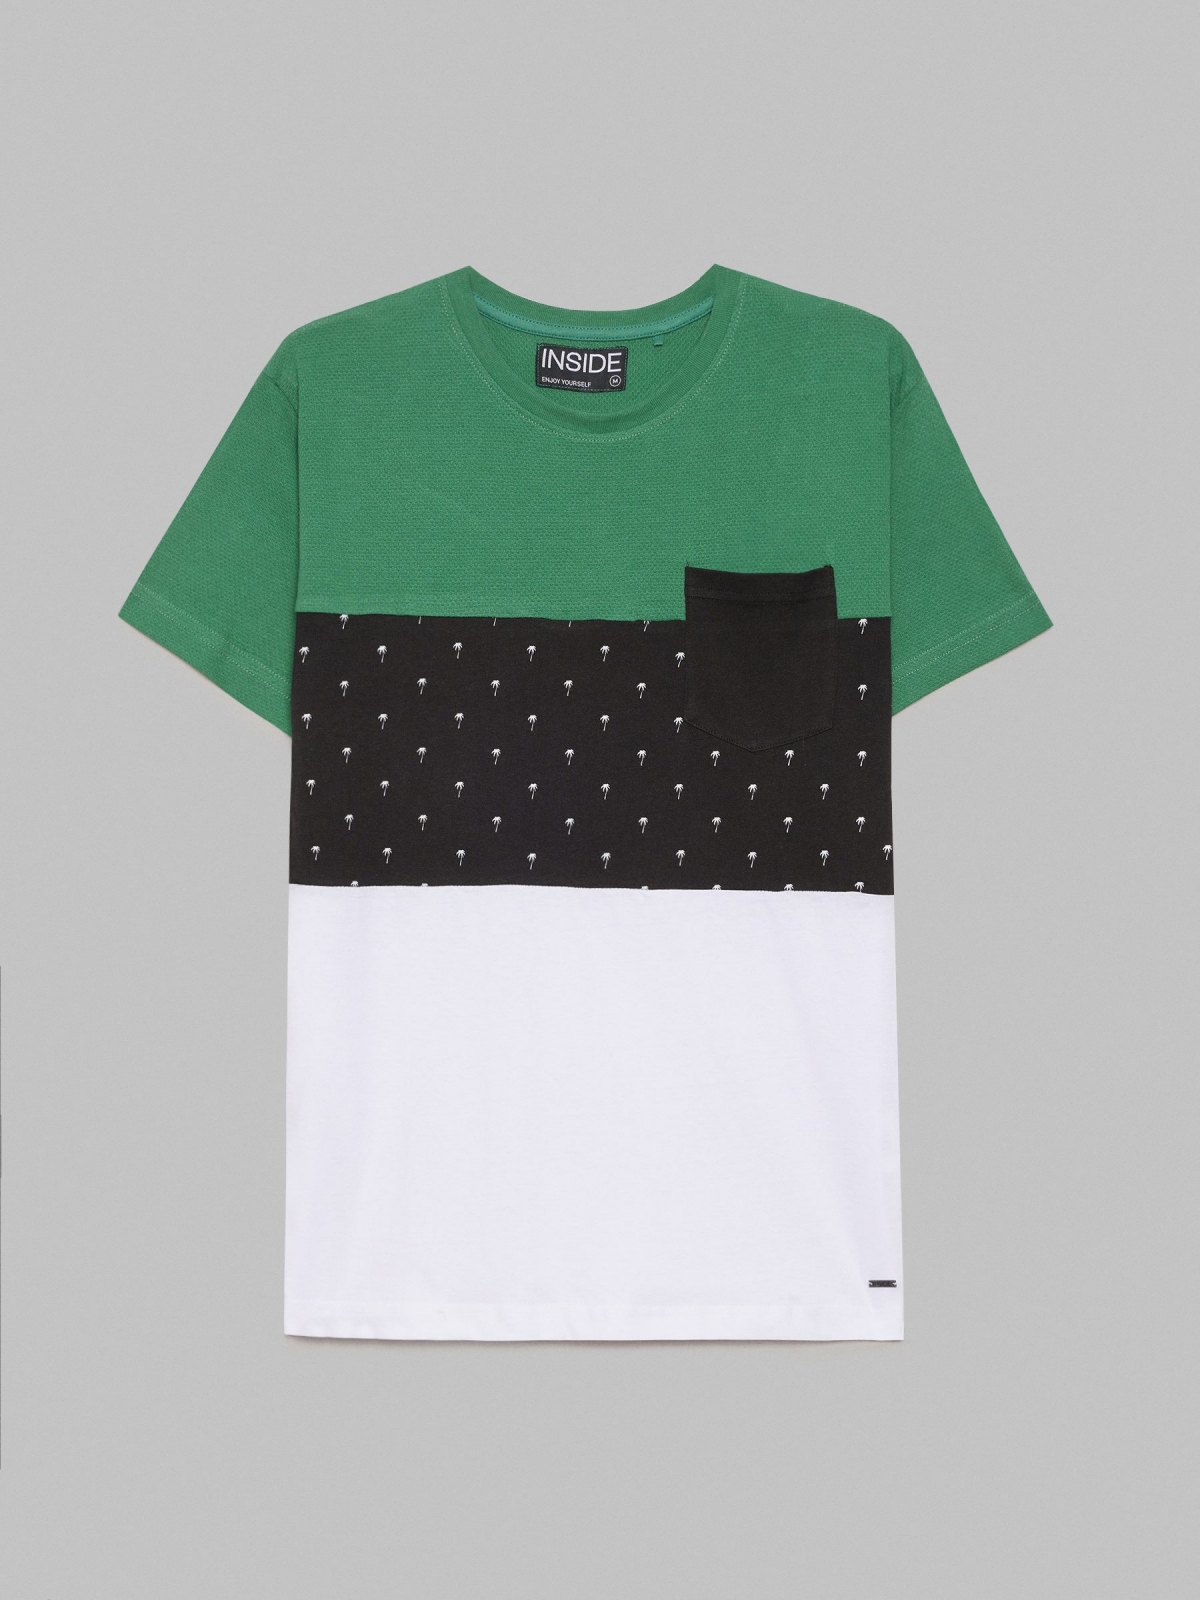  Colour block t-shirt with polka dots white